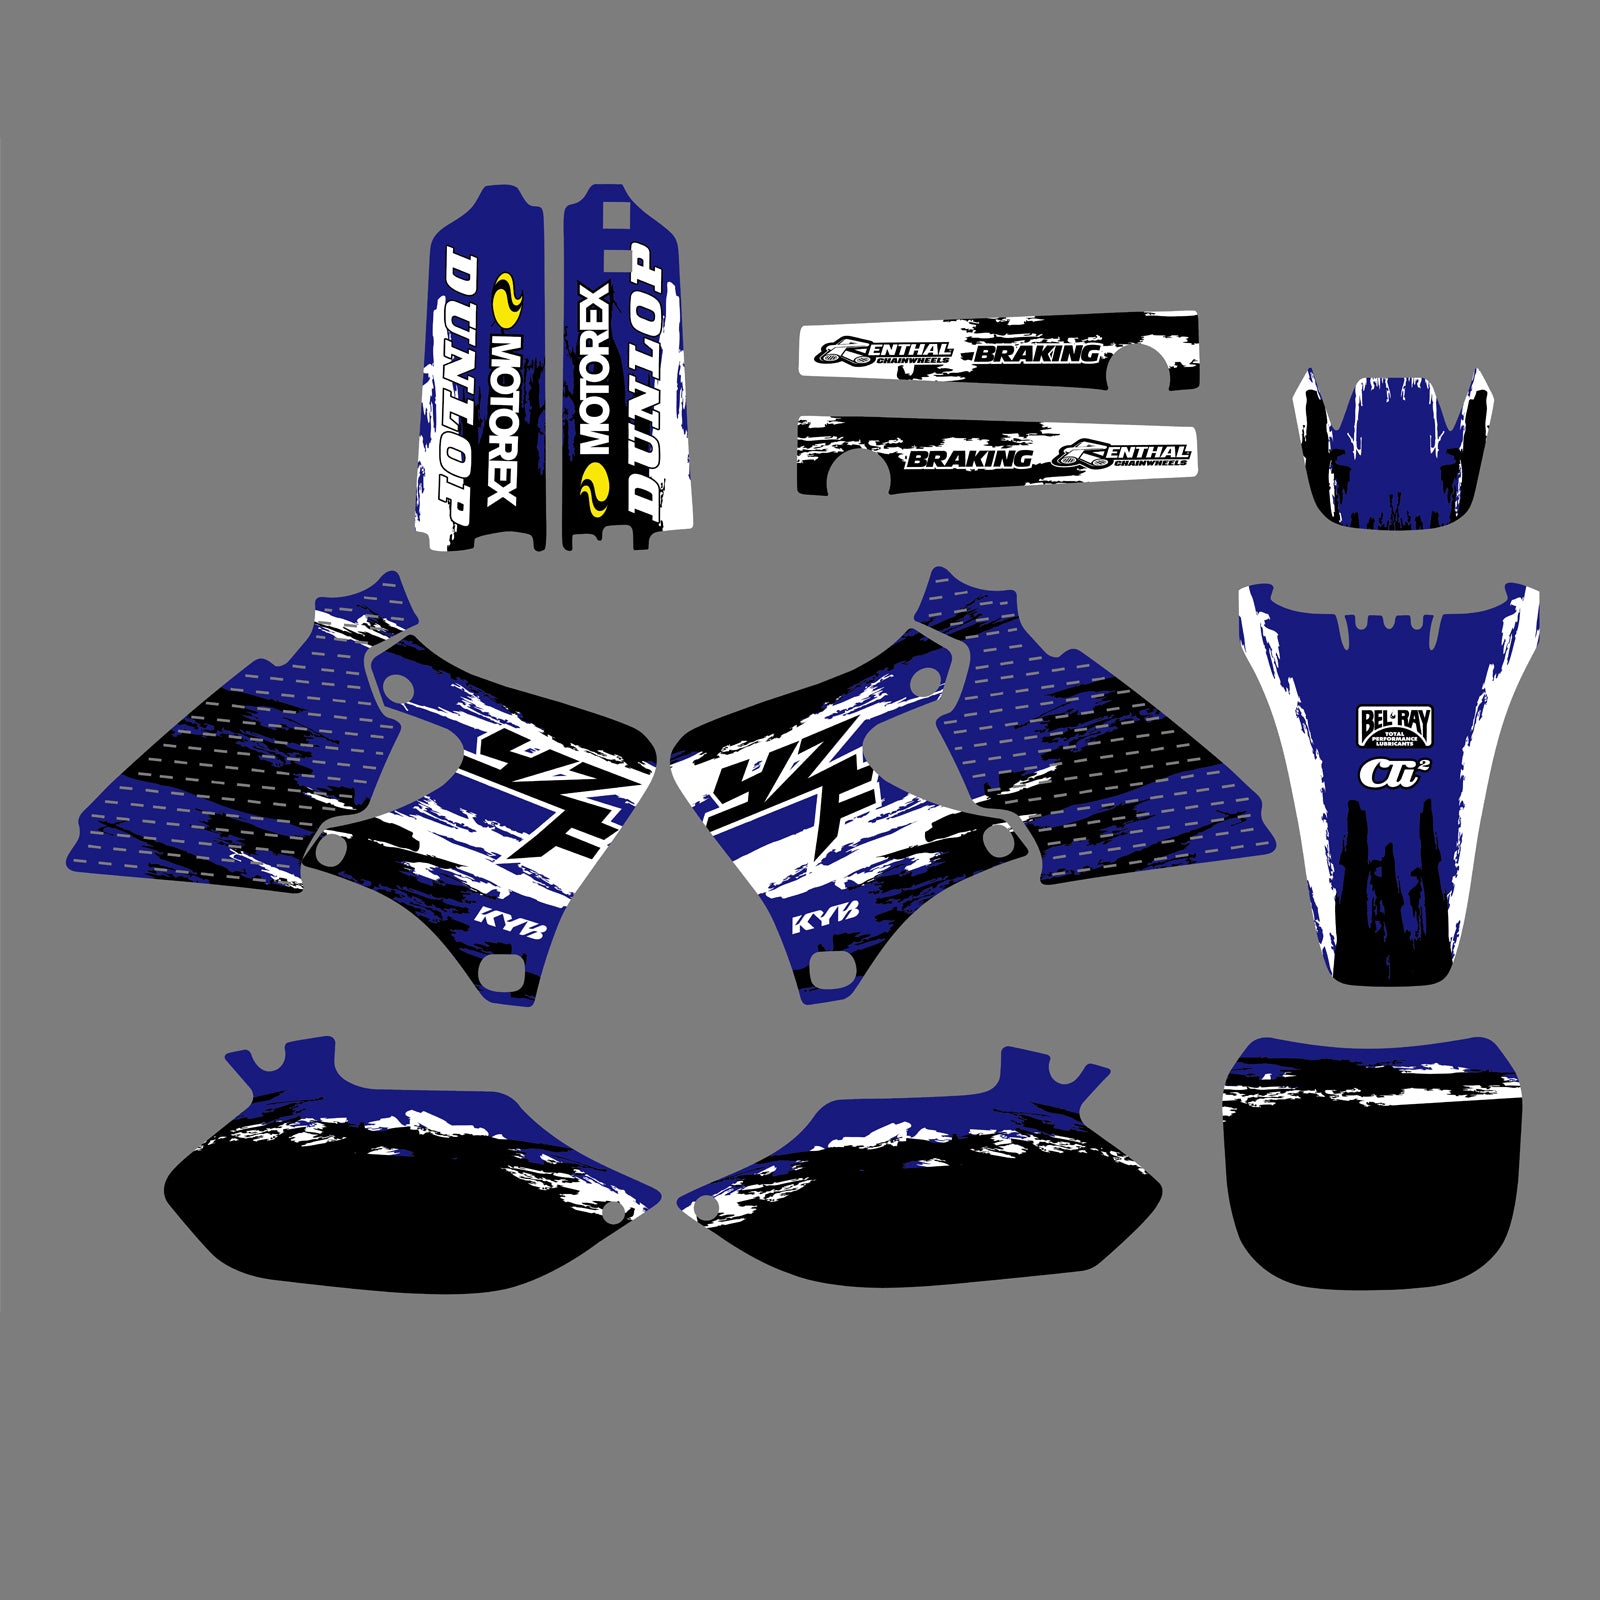 Team Decals Stickers Graphics Kit For YAMAHA YZ250F YZ400F YZ426F 1998-2002